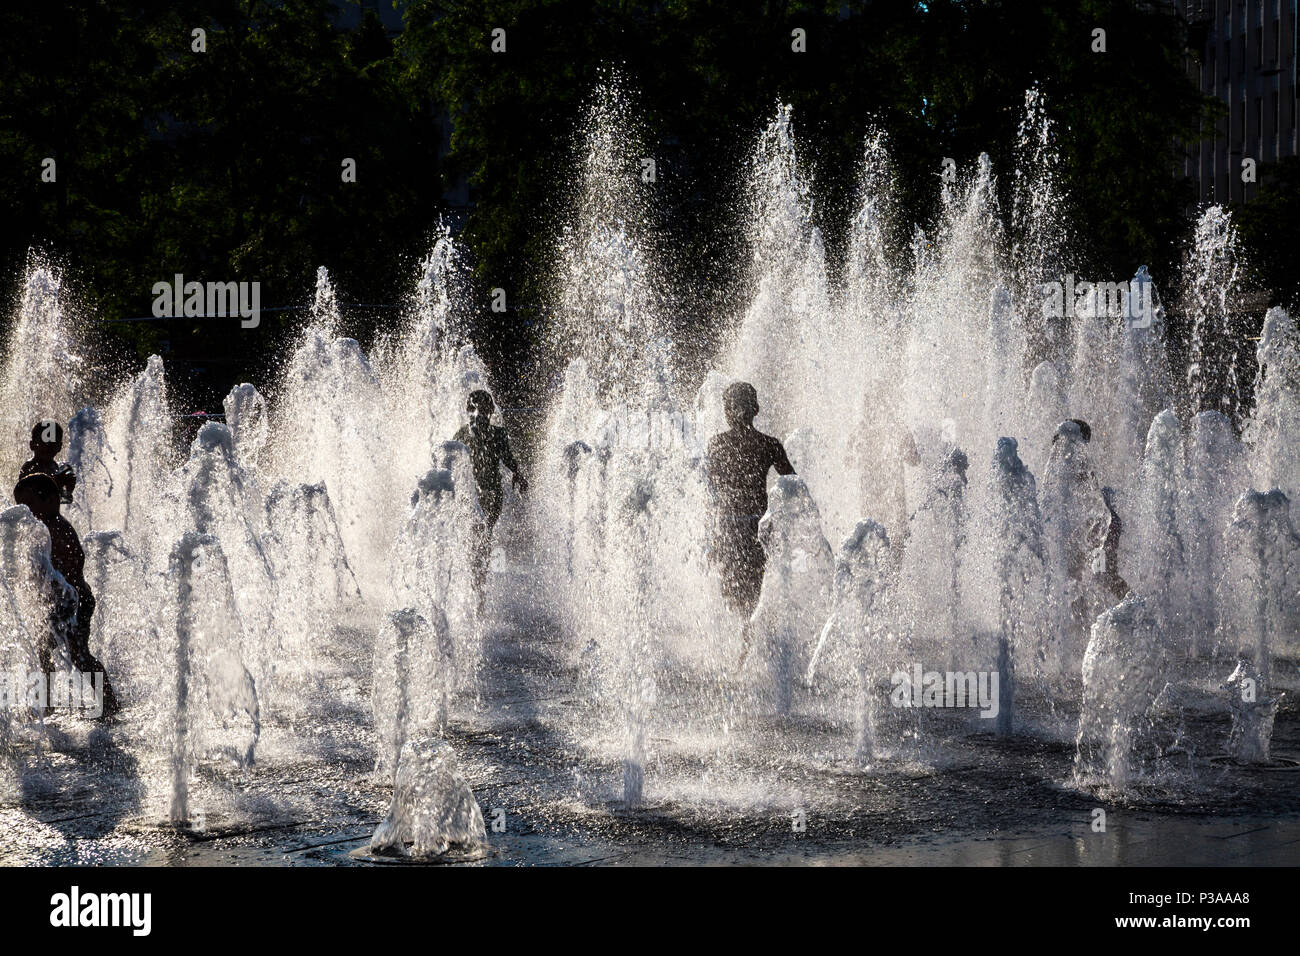 Silhouettes of children running though a fountain in the summer, Piccadilly Gardens, Manchester, UK Stock Photo